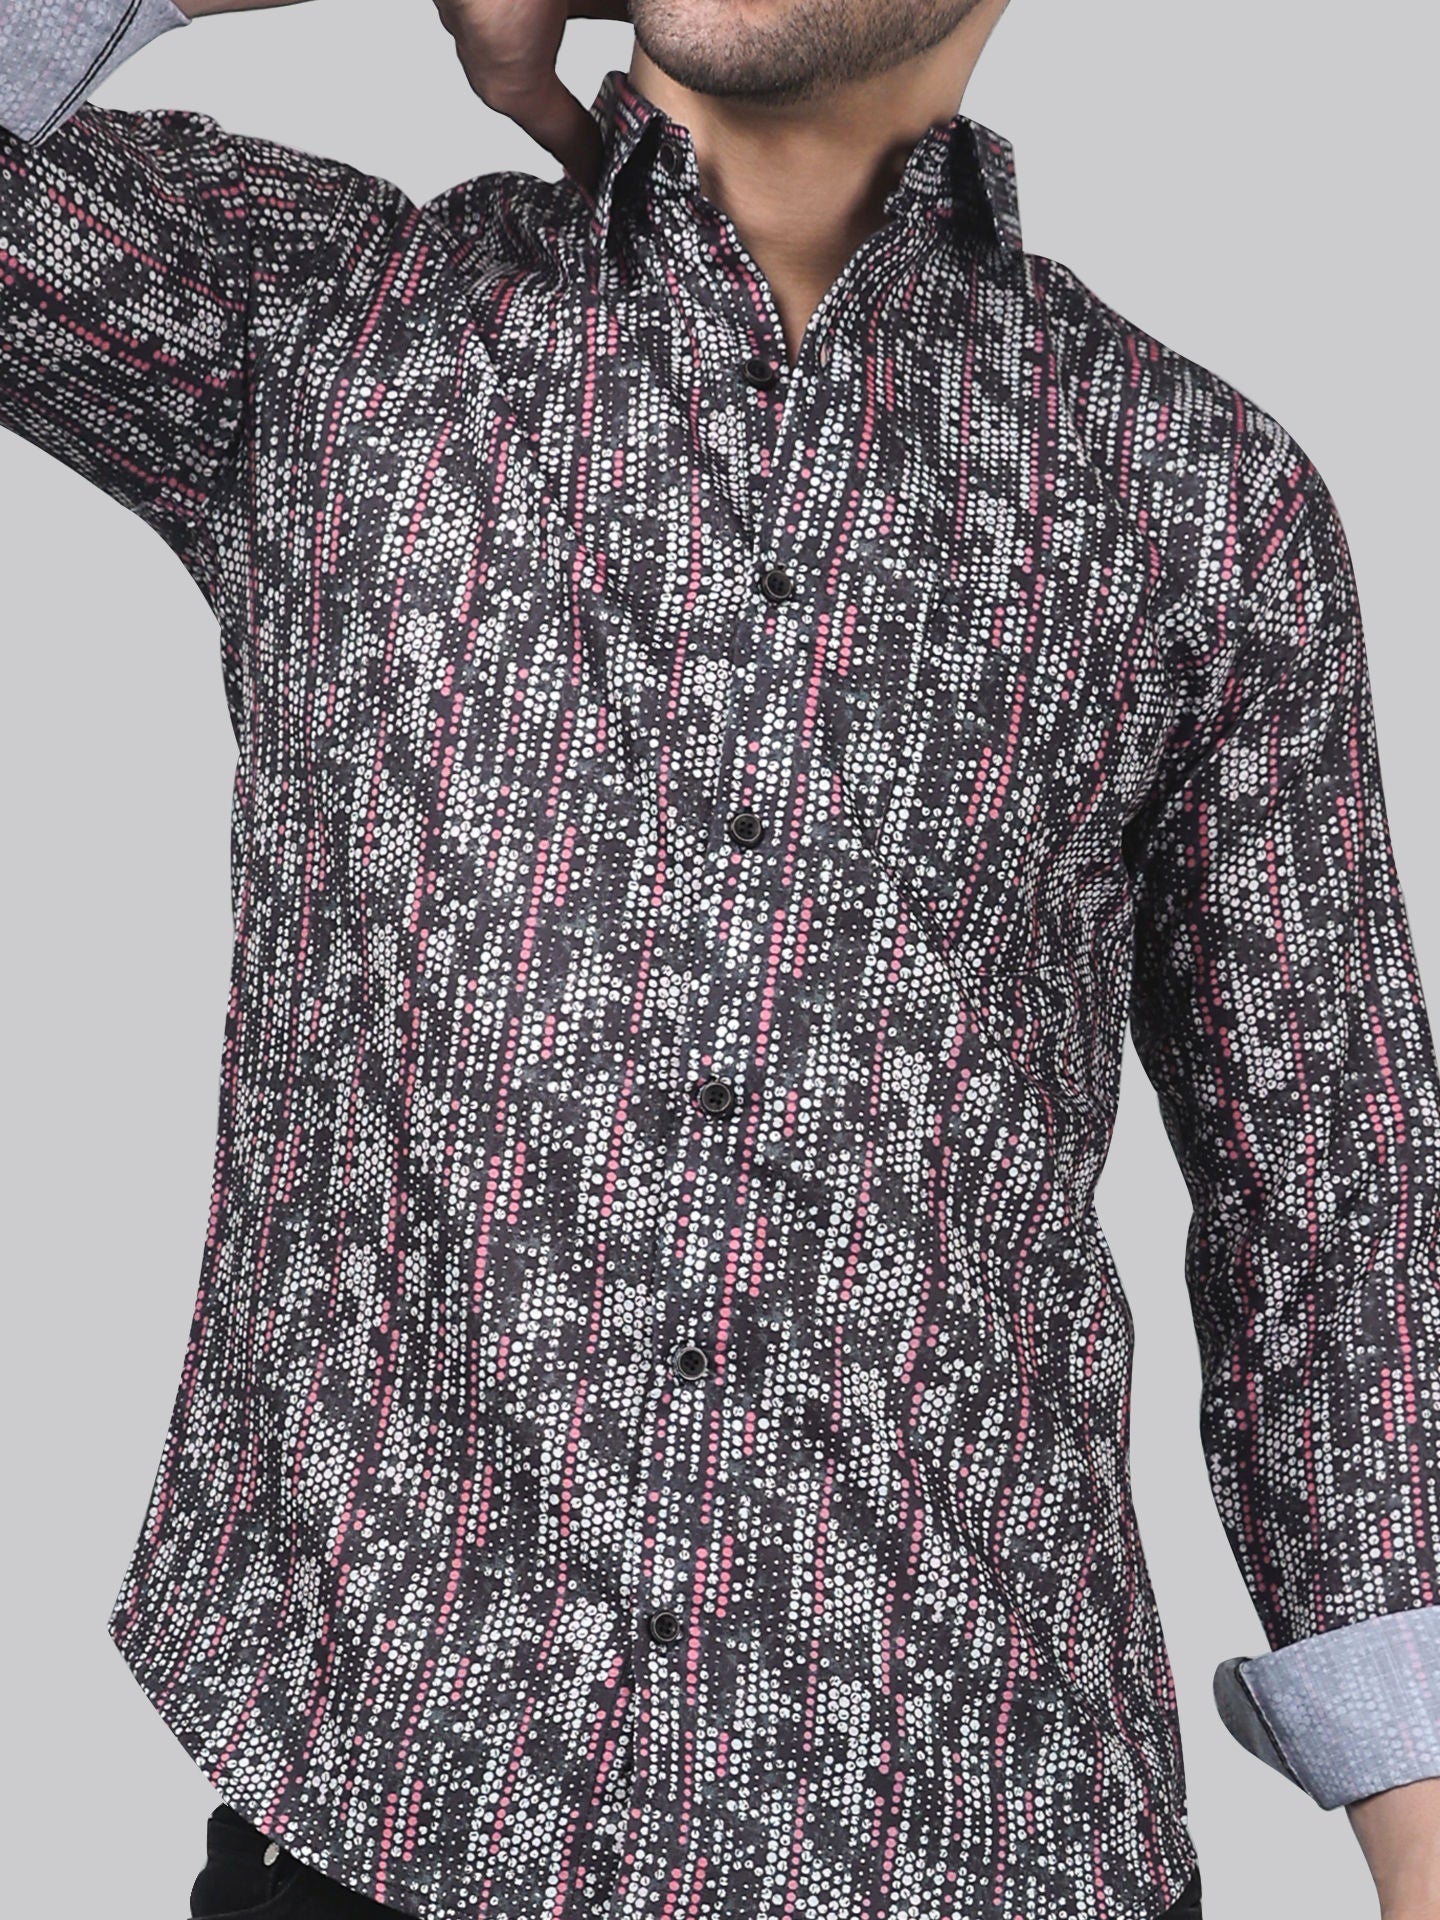 TryBuy Luxe Men's Linen Casual Printed Full Sleeves Shirt - TryBuy® USA🇺🇸